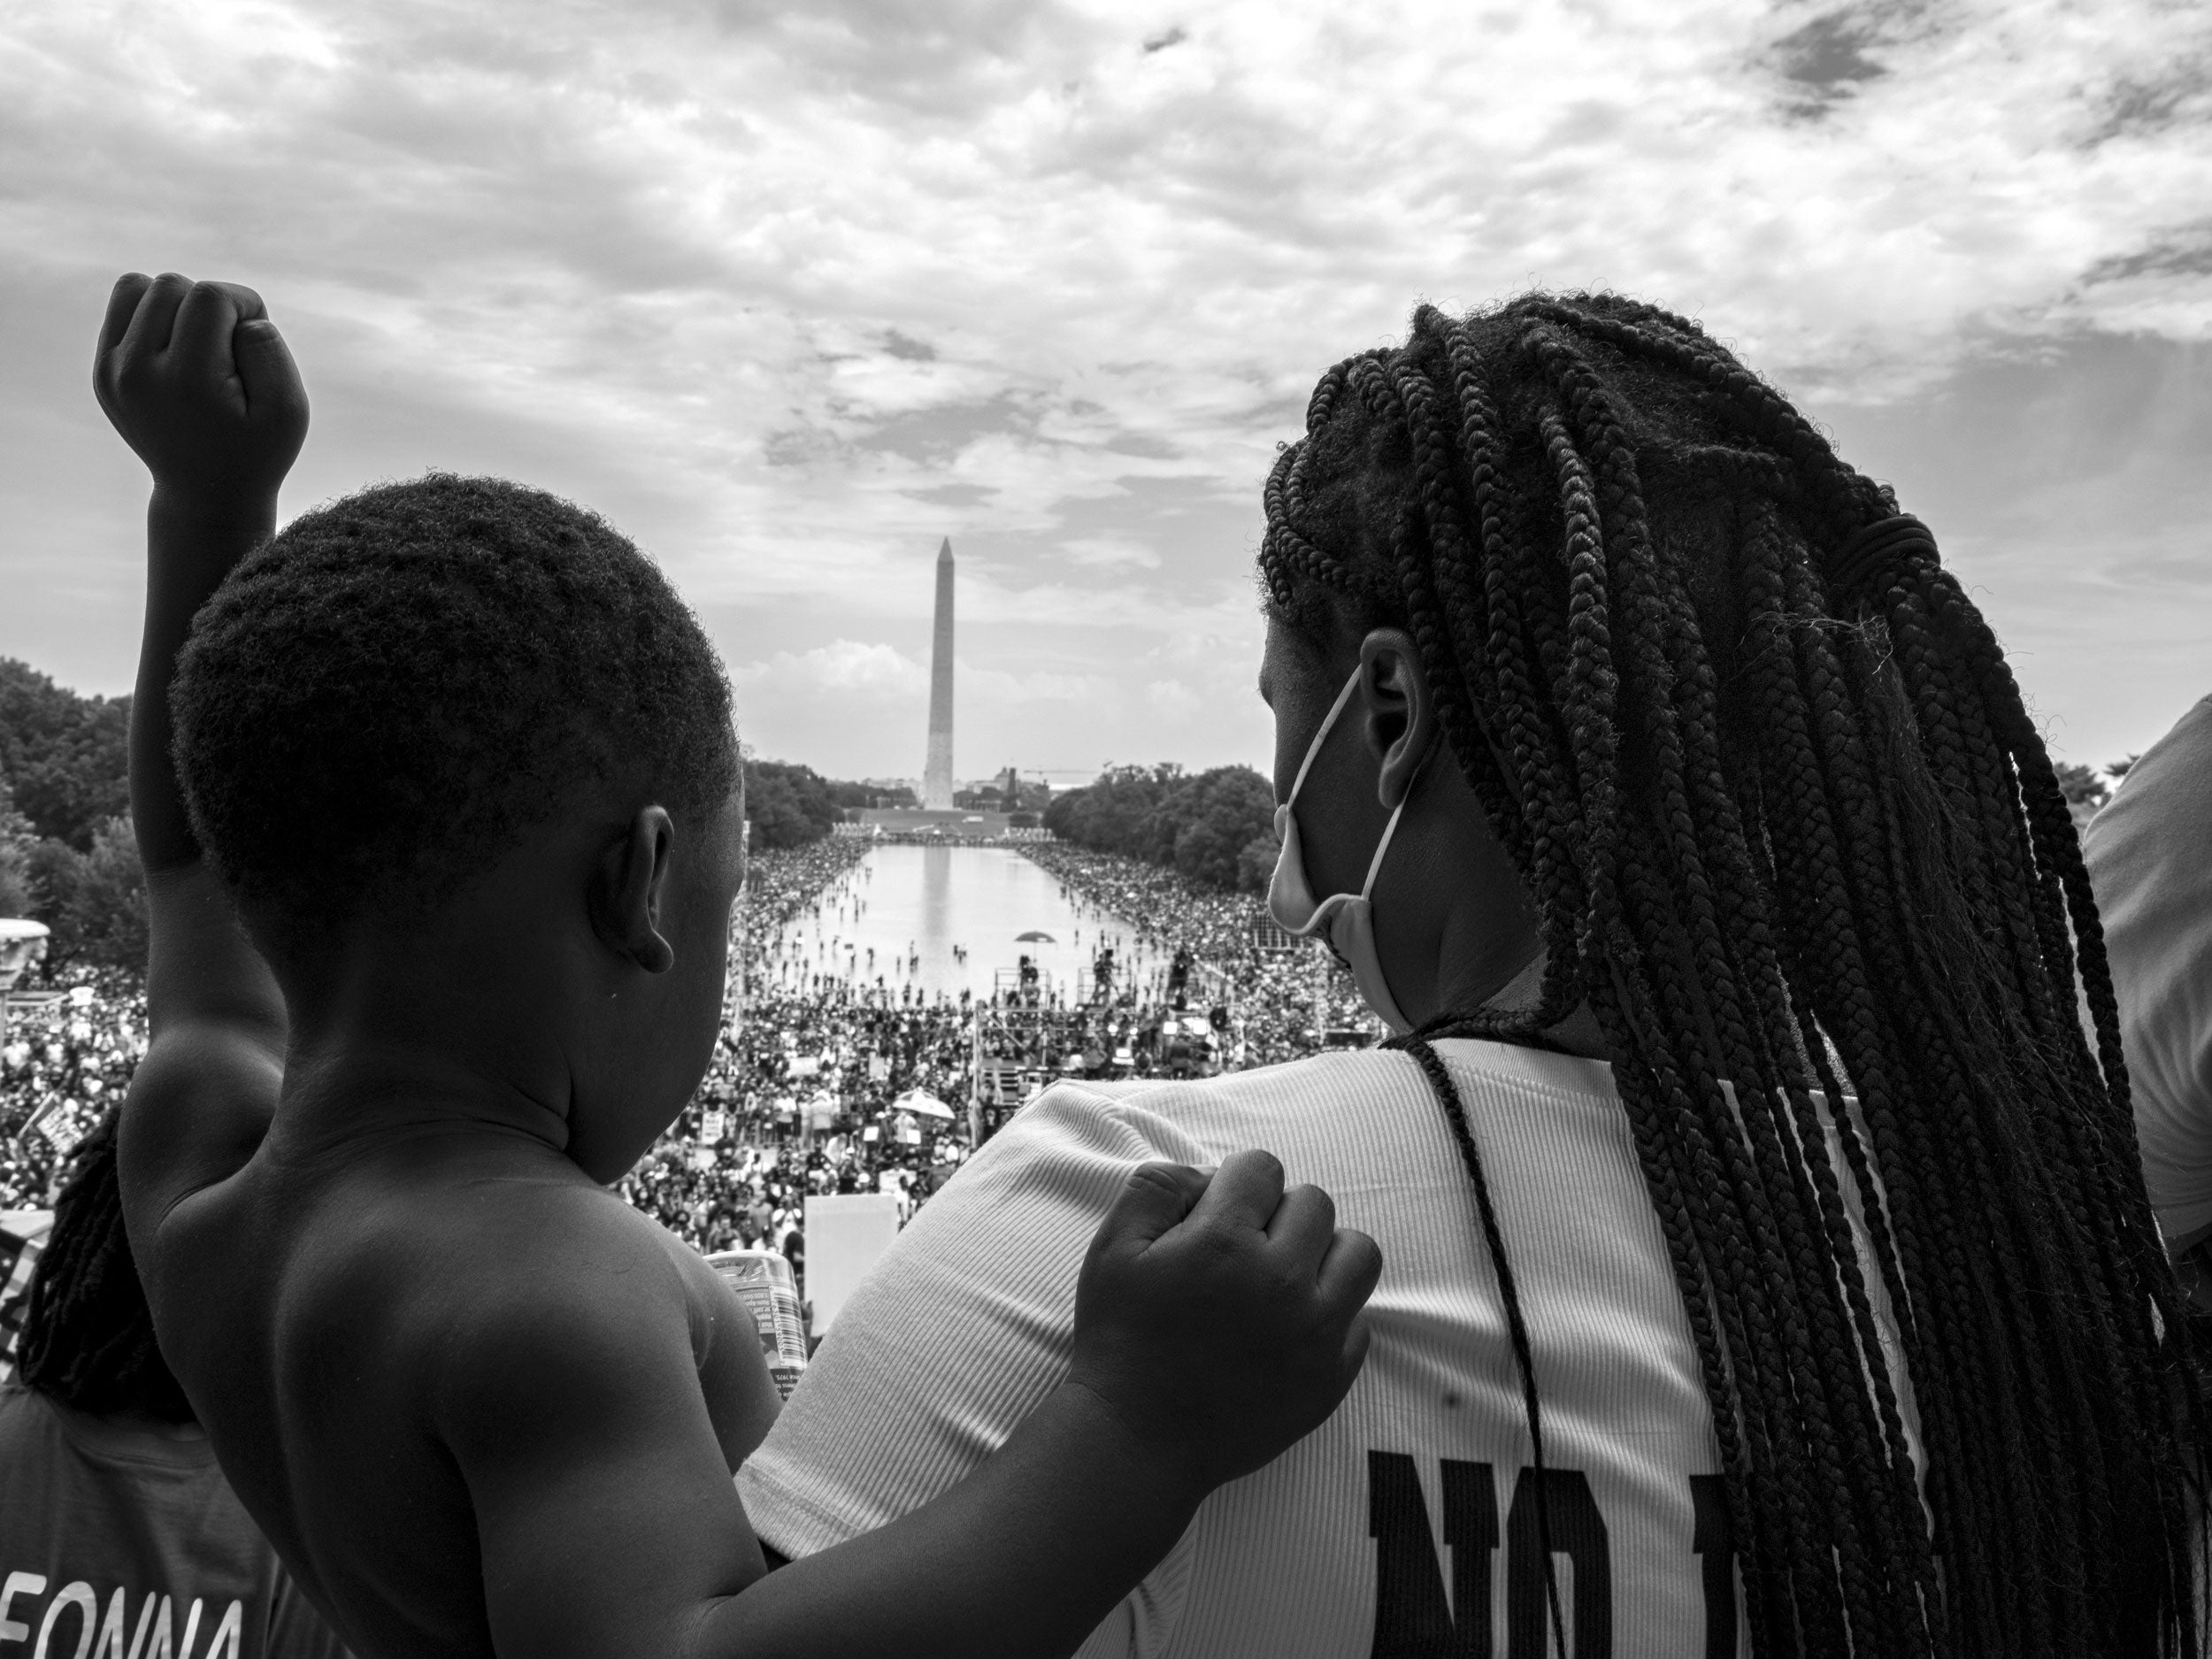 Protest at the National Mall in August, 2020, on the 57th anniversary of the March on Washington led by Martin Luther King